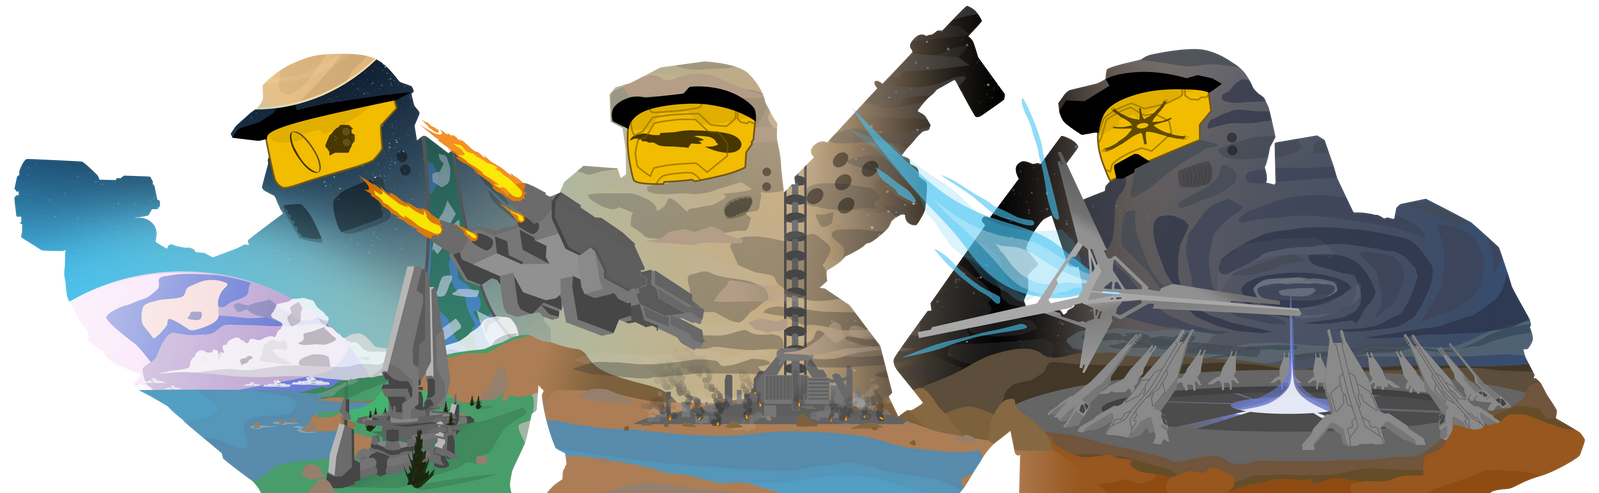 the_halo_trilogy___vector_art_by_firedragonmatty-db7qopw.png